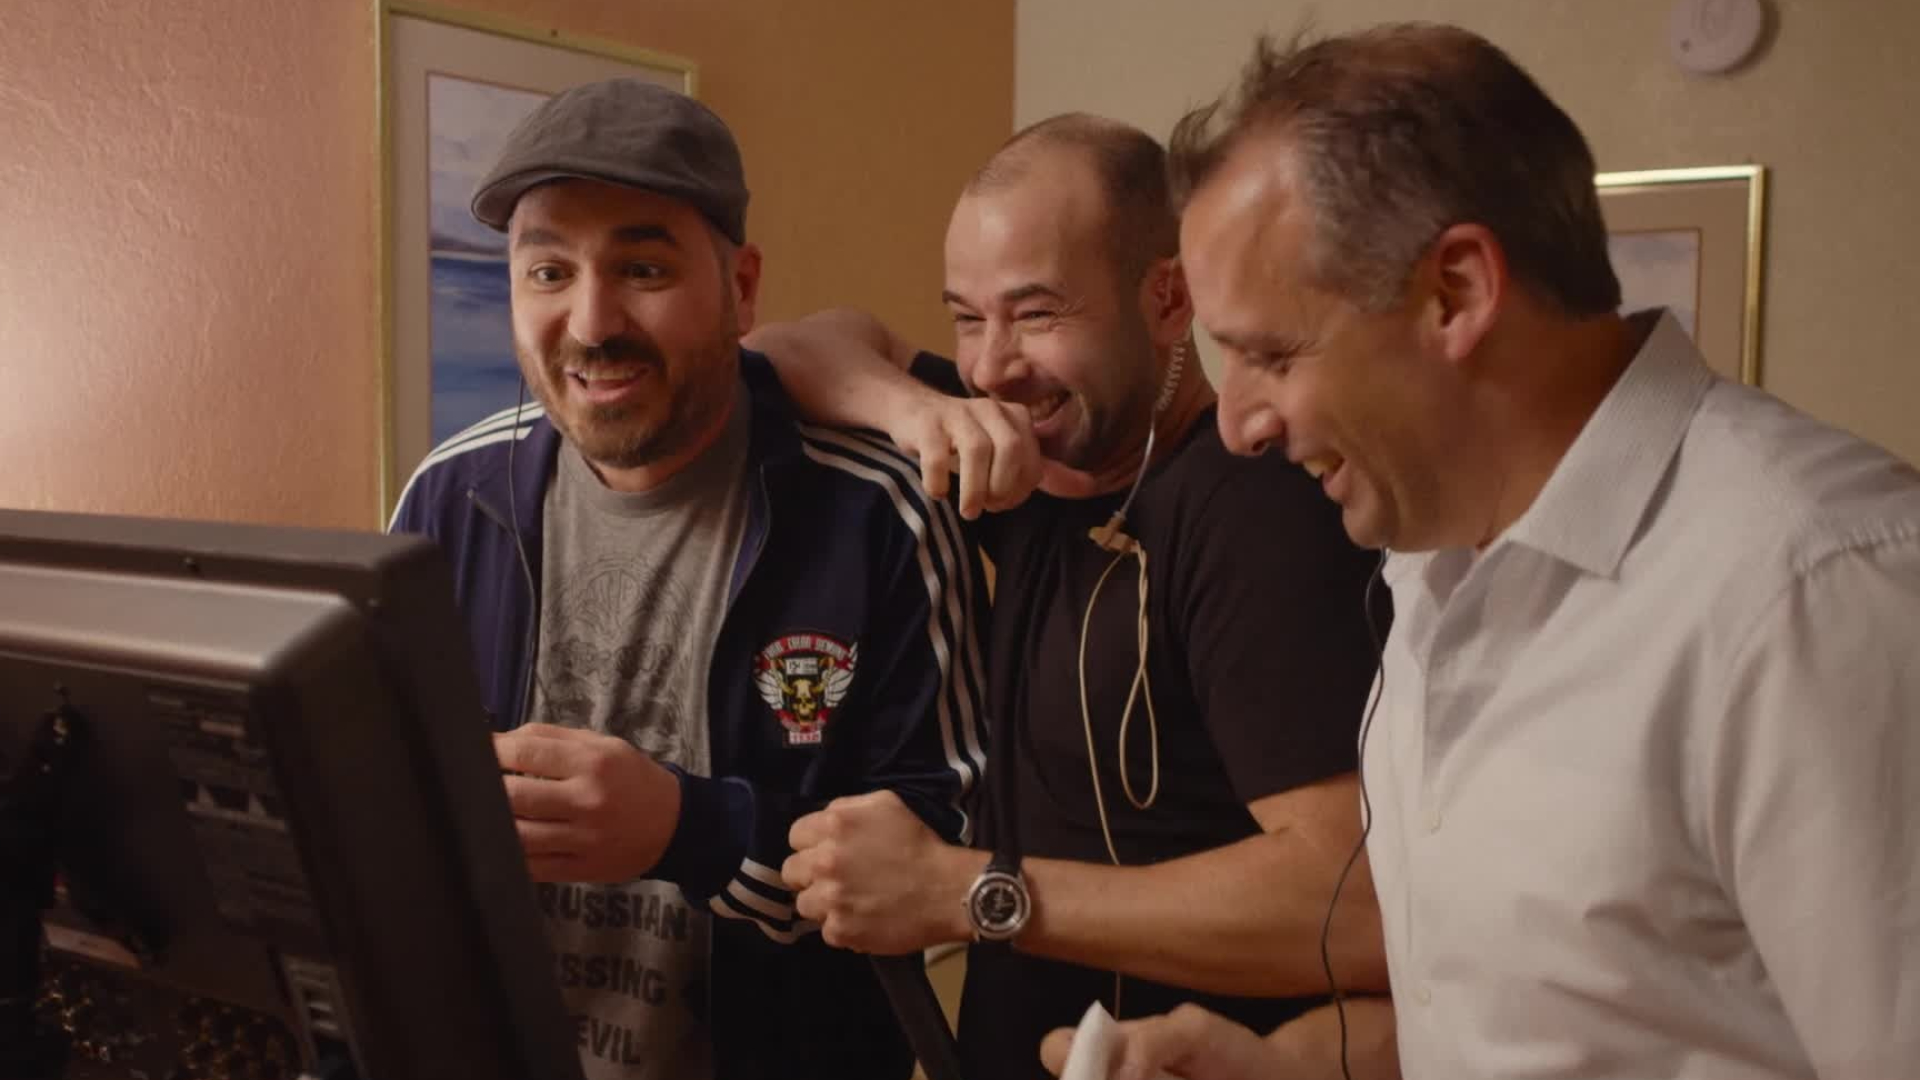 Download Impractical Jokers images, Comedic entertainment, High-quality pictures, Fan downloads, 1920x1080 Full HD Desktop